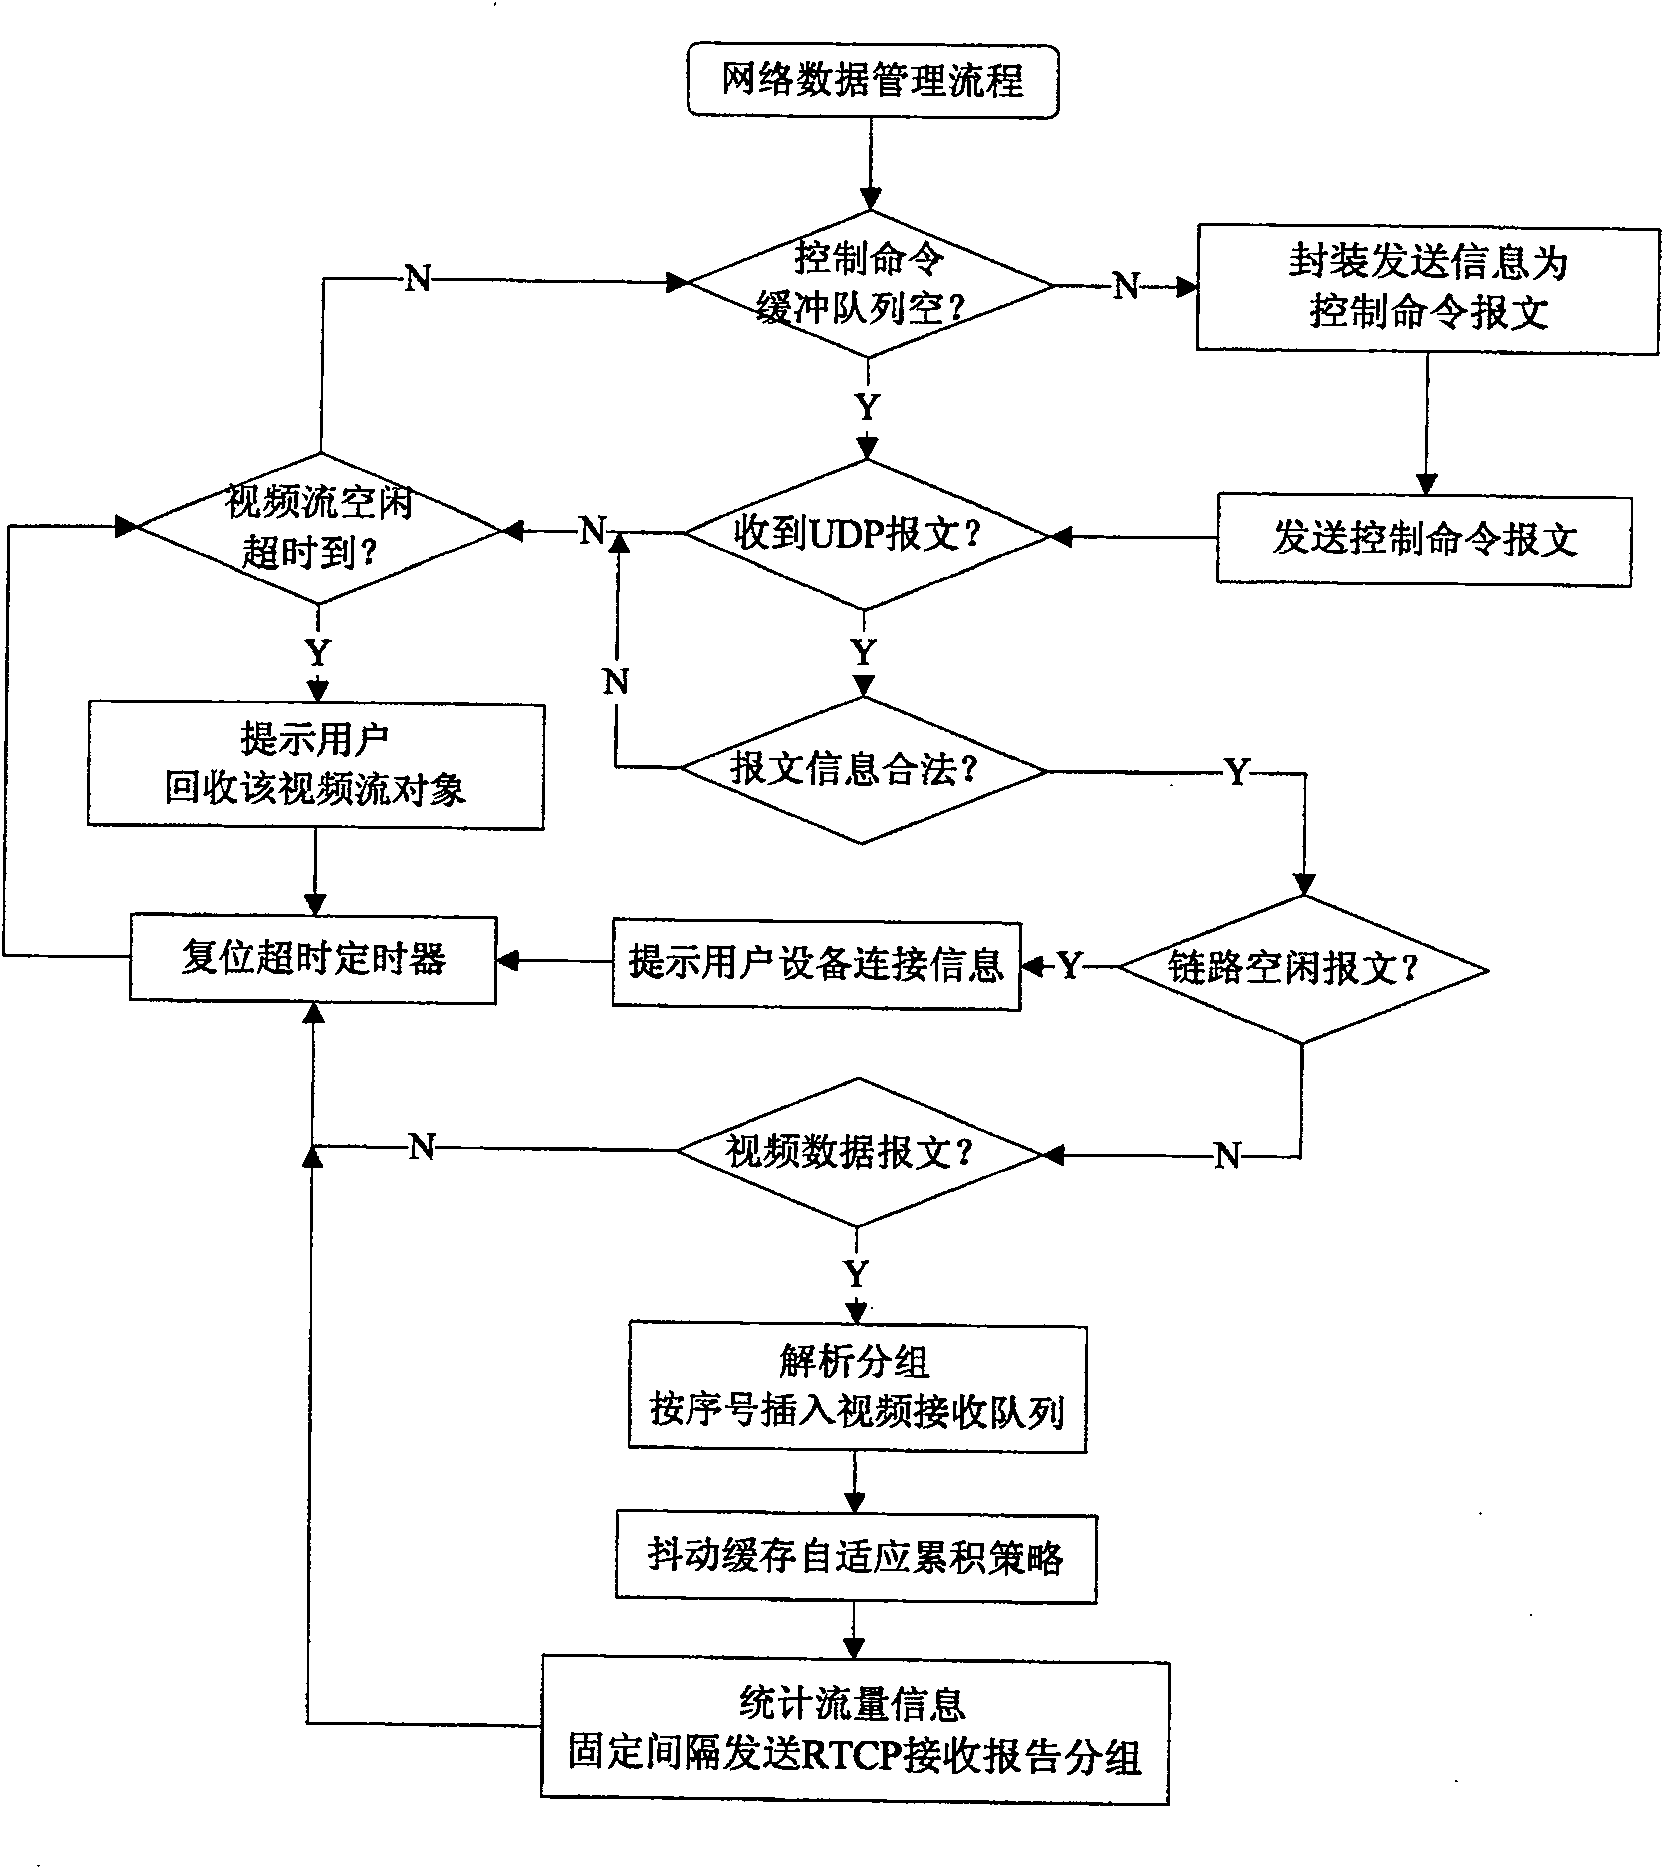 Apparatus for unified monitoring multi-path remote video